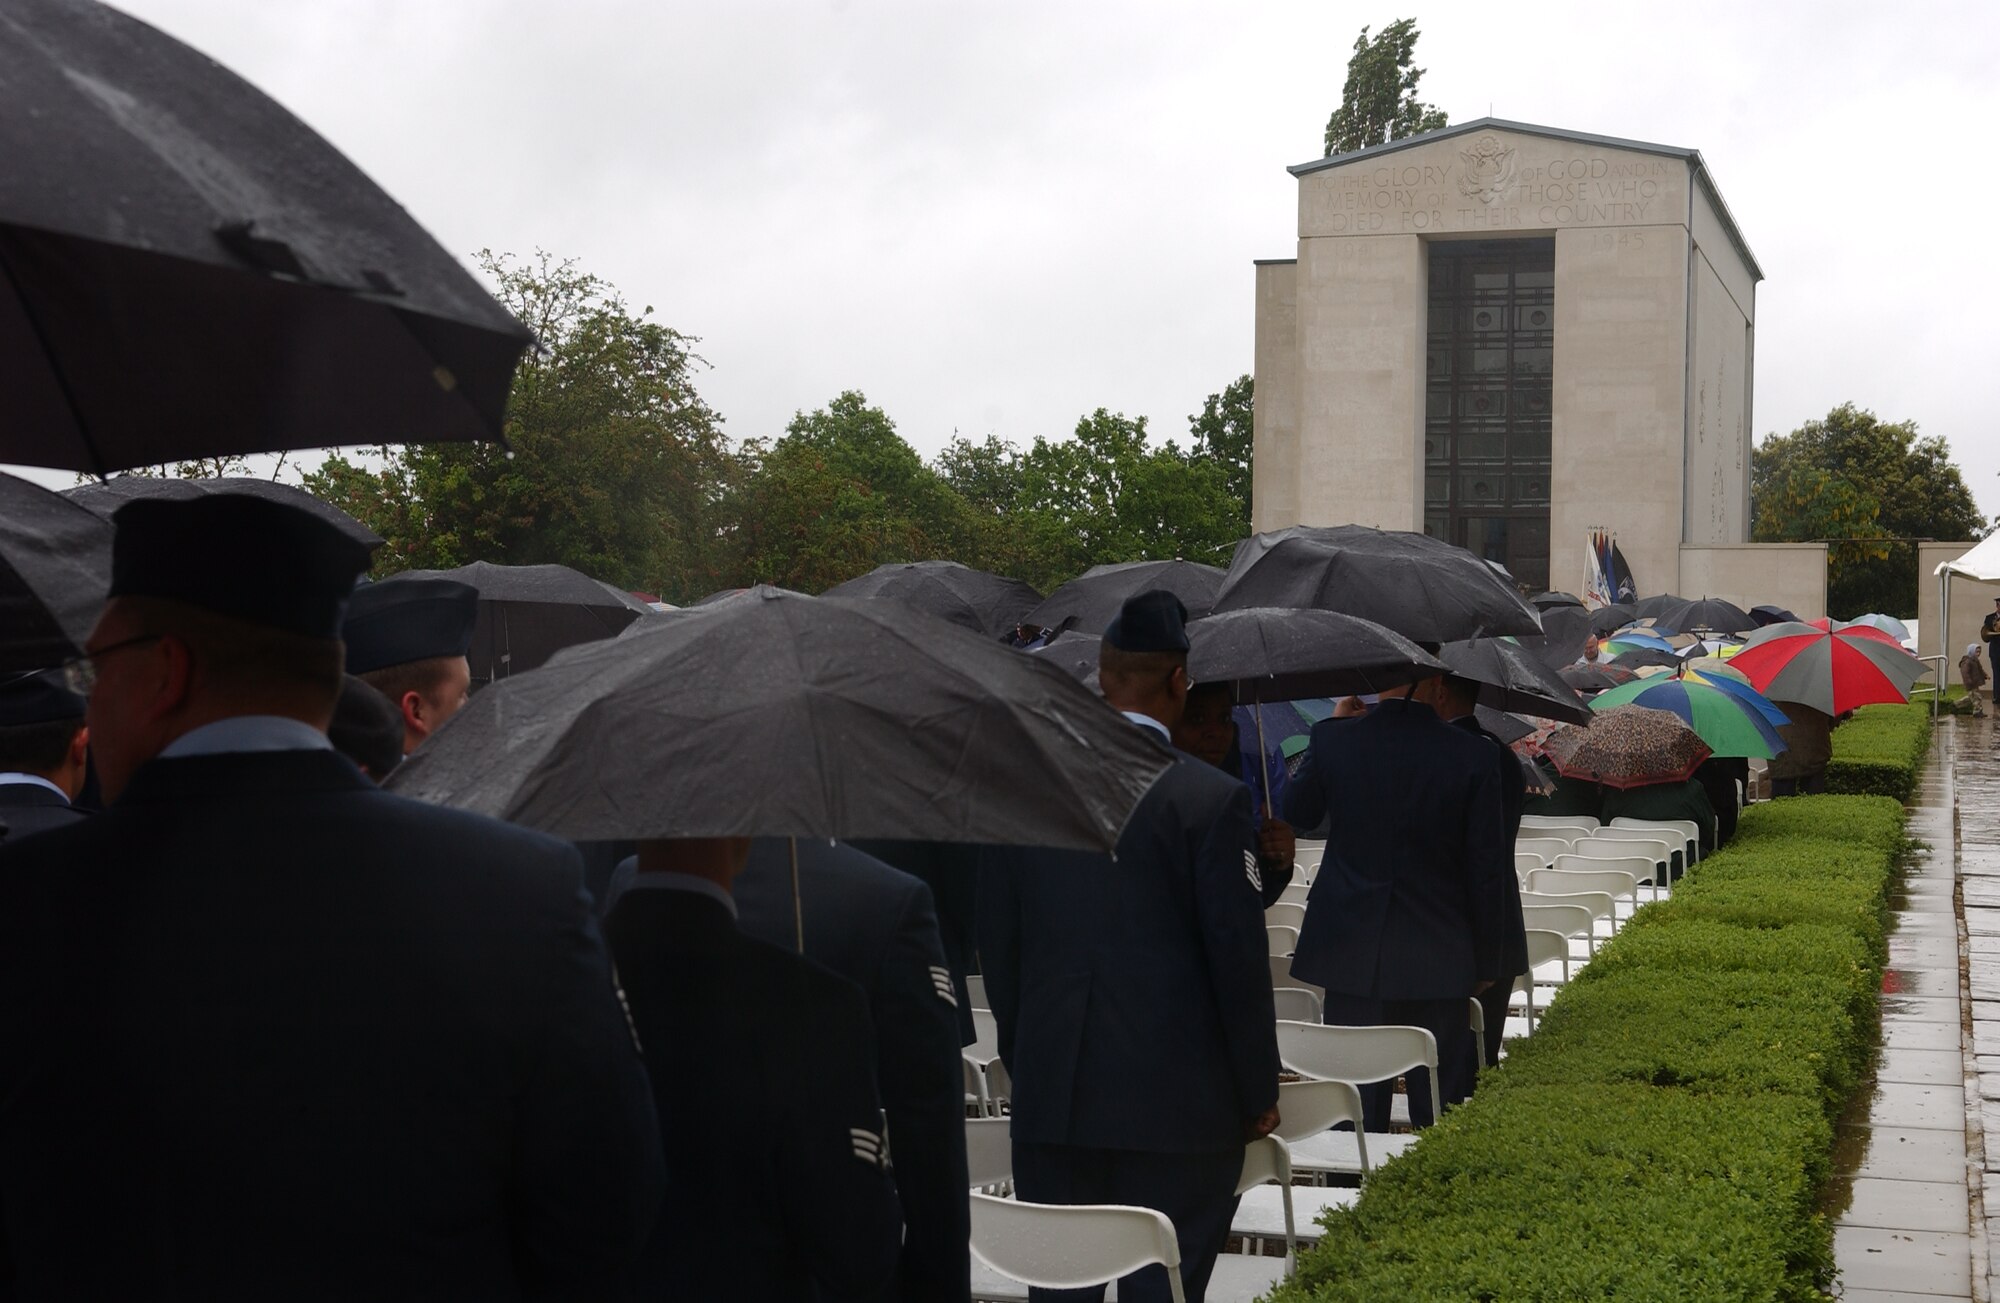 More than 1,000 British, American and other foreign citizens braved the cold, windy, wet conditions to attend the annual Memorial Day ceremony at the World War II American Cemetery in Cambridge, England, May 28, 2007. This year's ceremony was held in the worst Memorial Day weather in 17 years. (Air Force photo by Tech. Sgt. Tracy L. DeMarco)